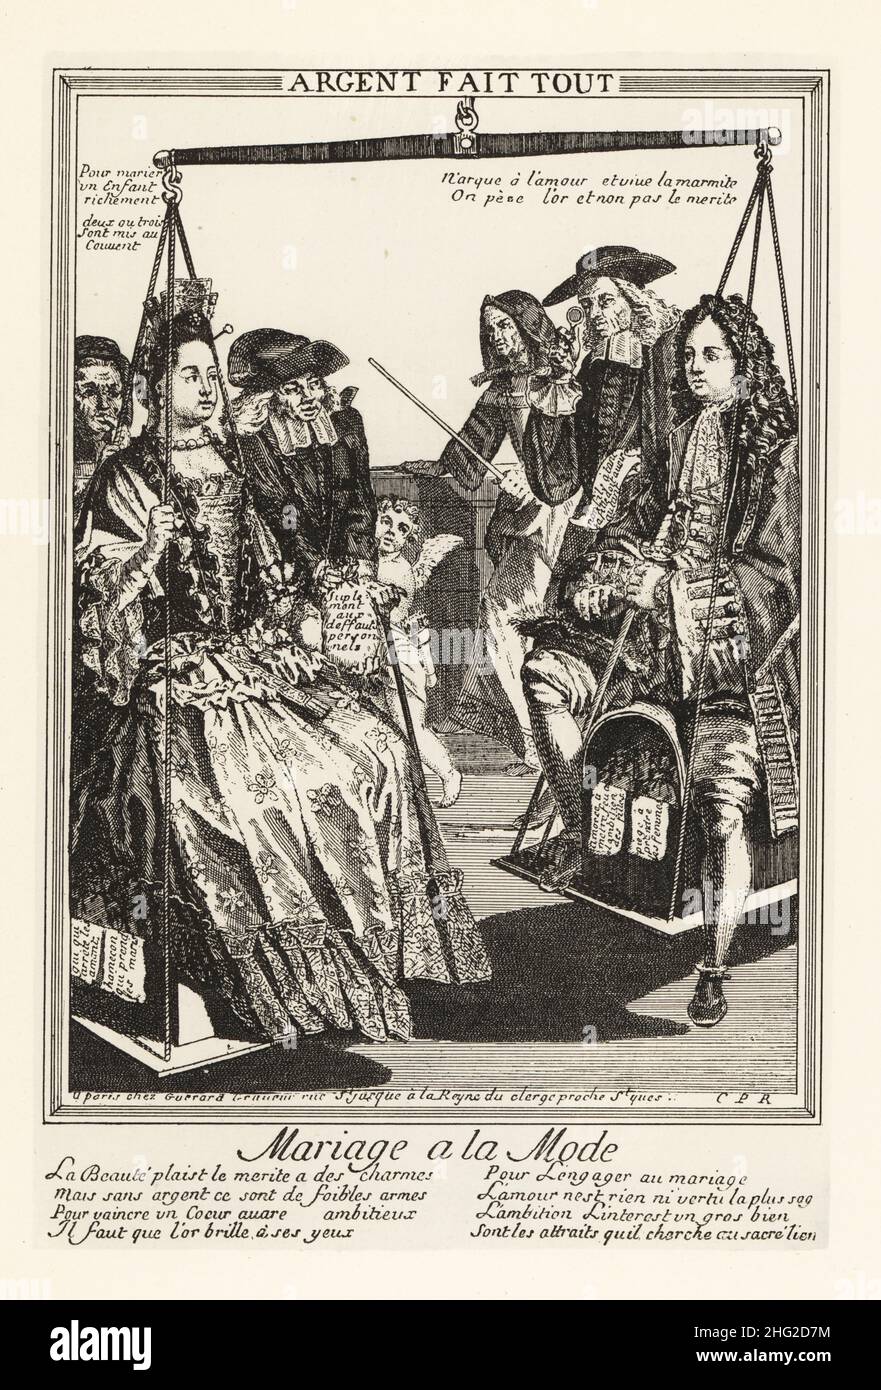 A couple sits in a public weight balance to compare their assets before marriage. Advisors add supplements to the scales. Mariage a la Mode. Argent Fait Tout. From a satirical print by Nicolas Guerard, rue St Jacques a la Reine du Clerge, circa 1715. Lithograph from Henry Rene d’Allemagne’s Recreations et Passe-Temps, Games and Pastimes, Hachette, Paris, 1906. Stock Photo